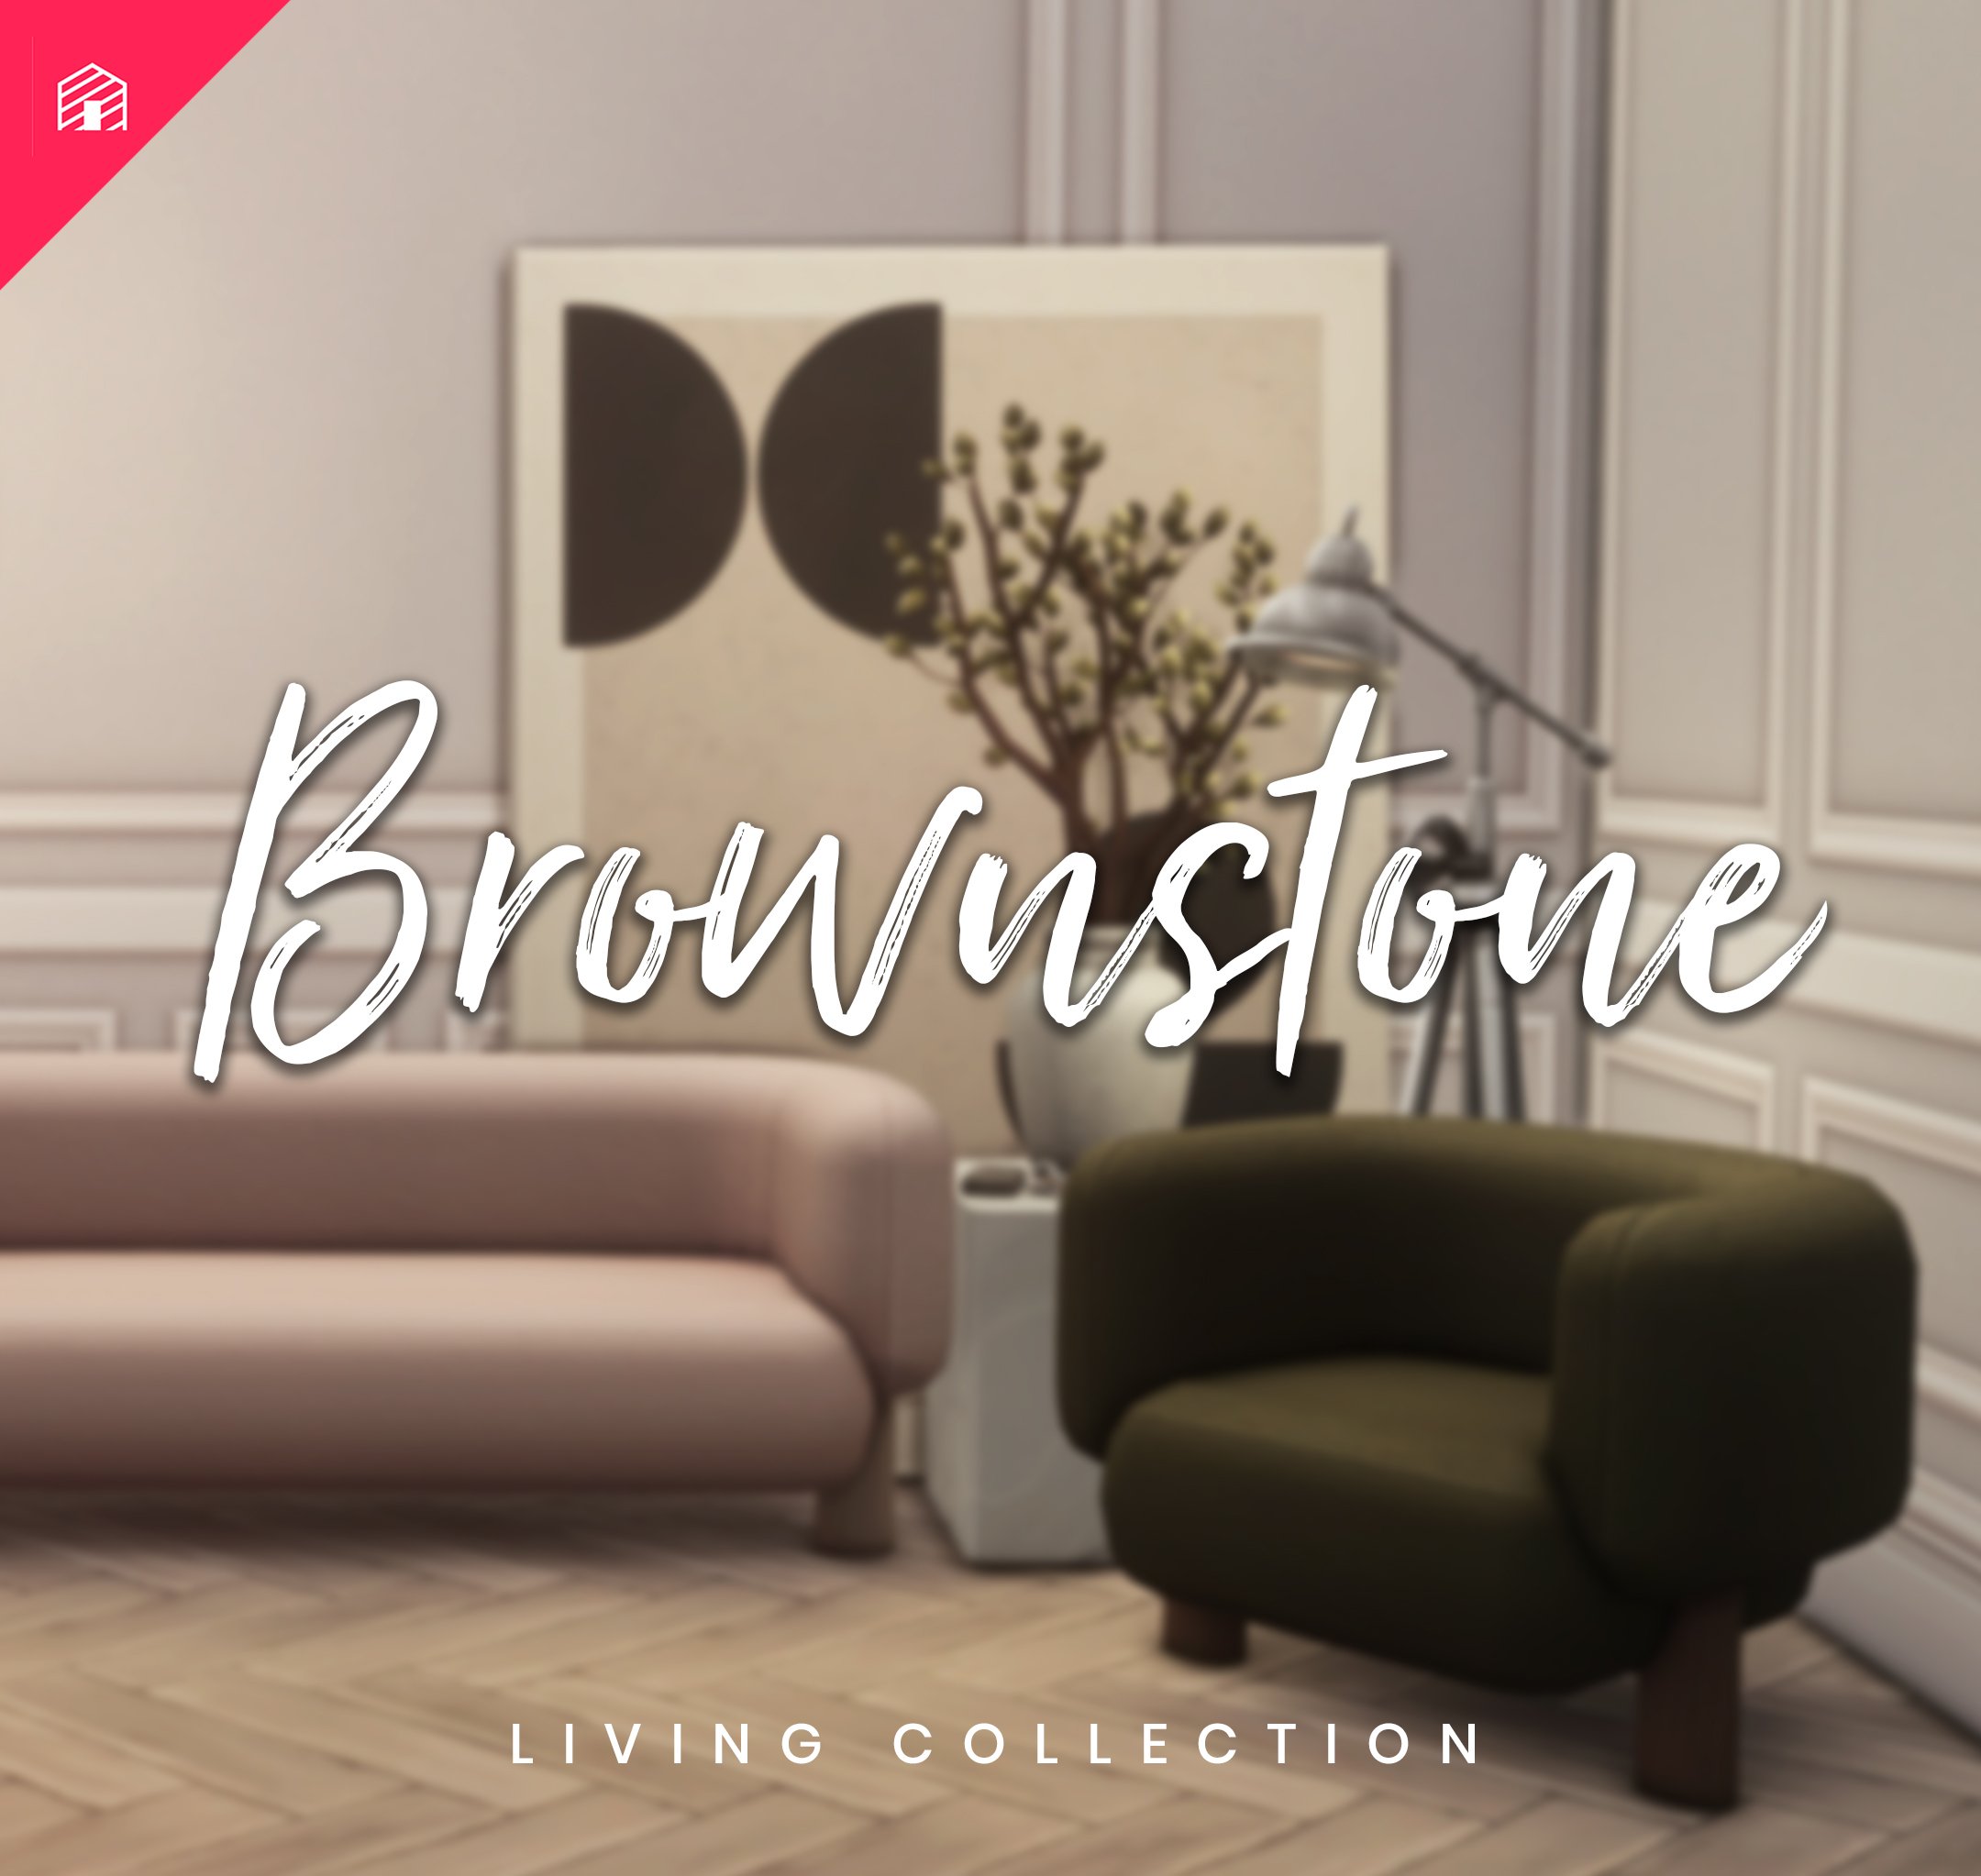 Collection Brownstone - Partie 3